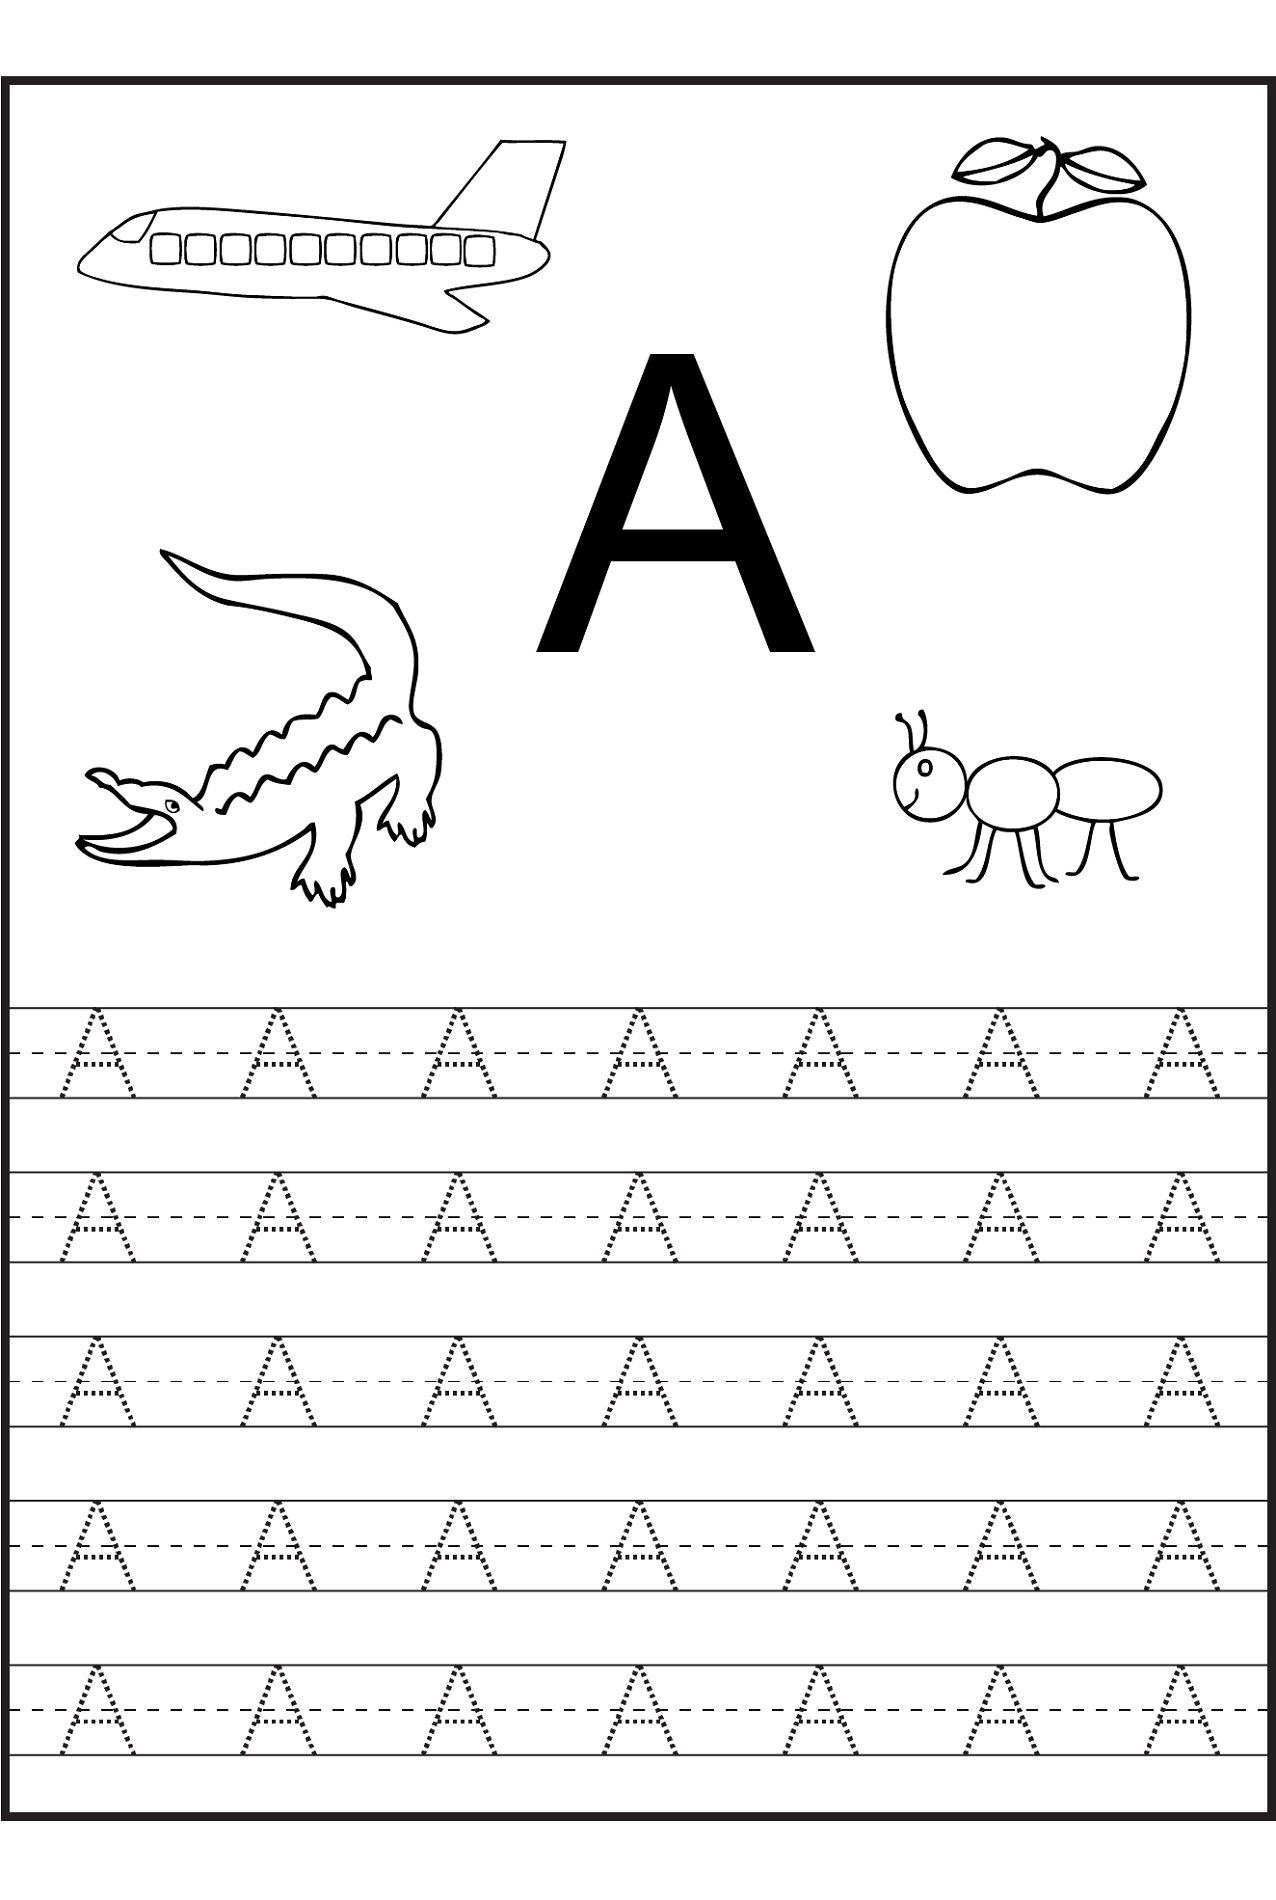 trace the letter a tracing